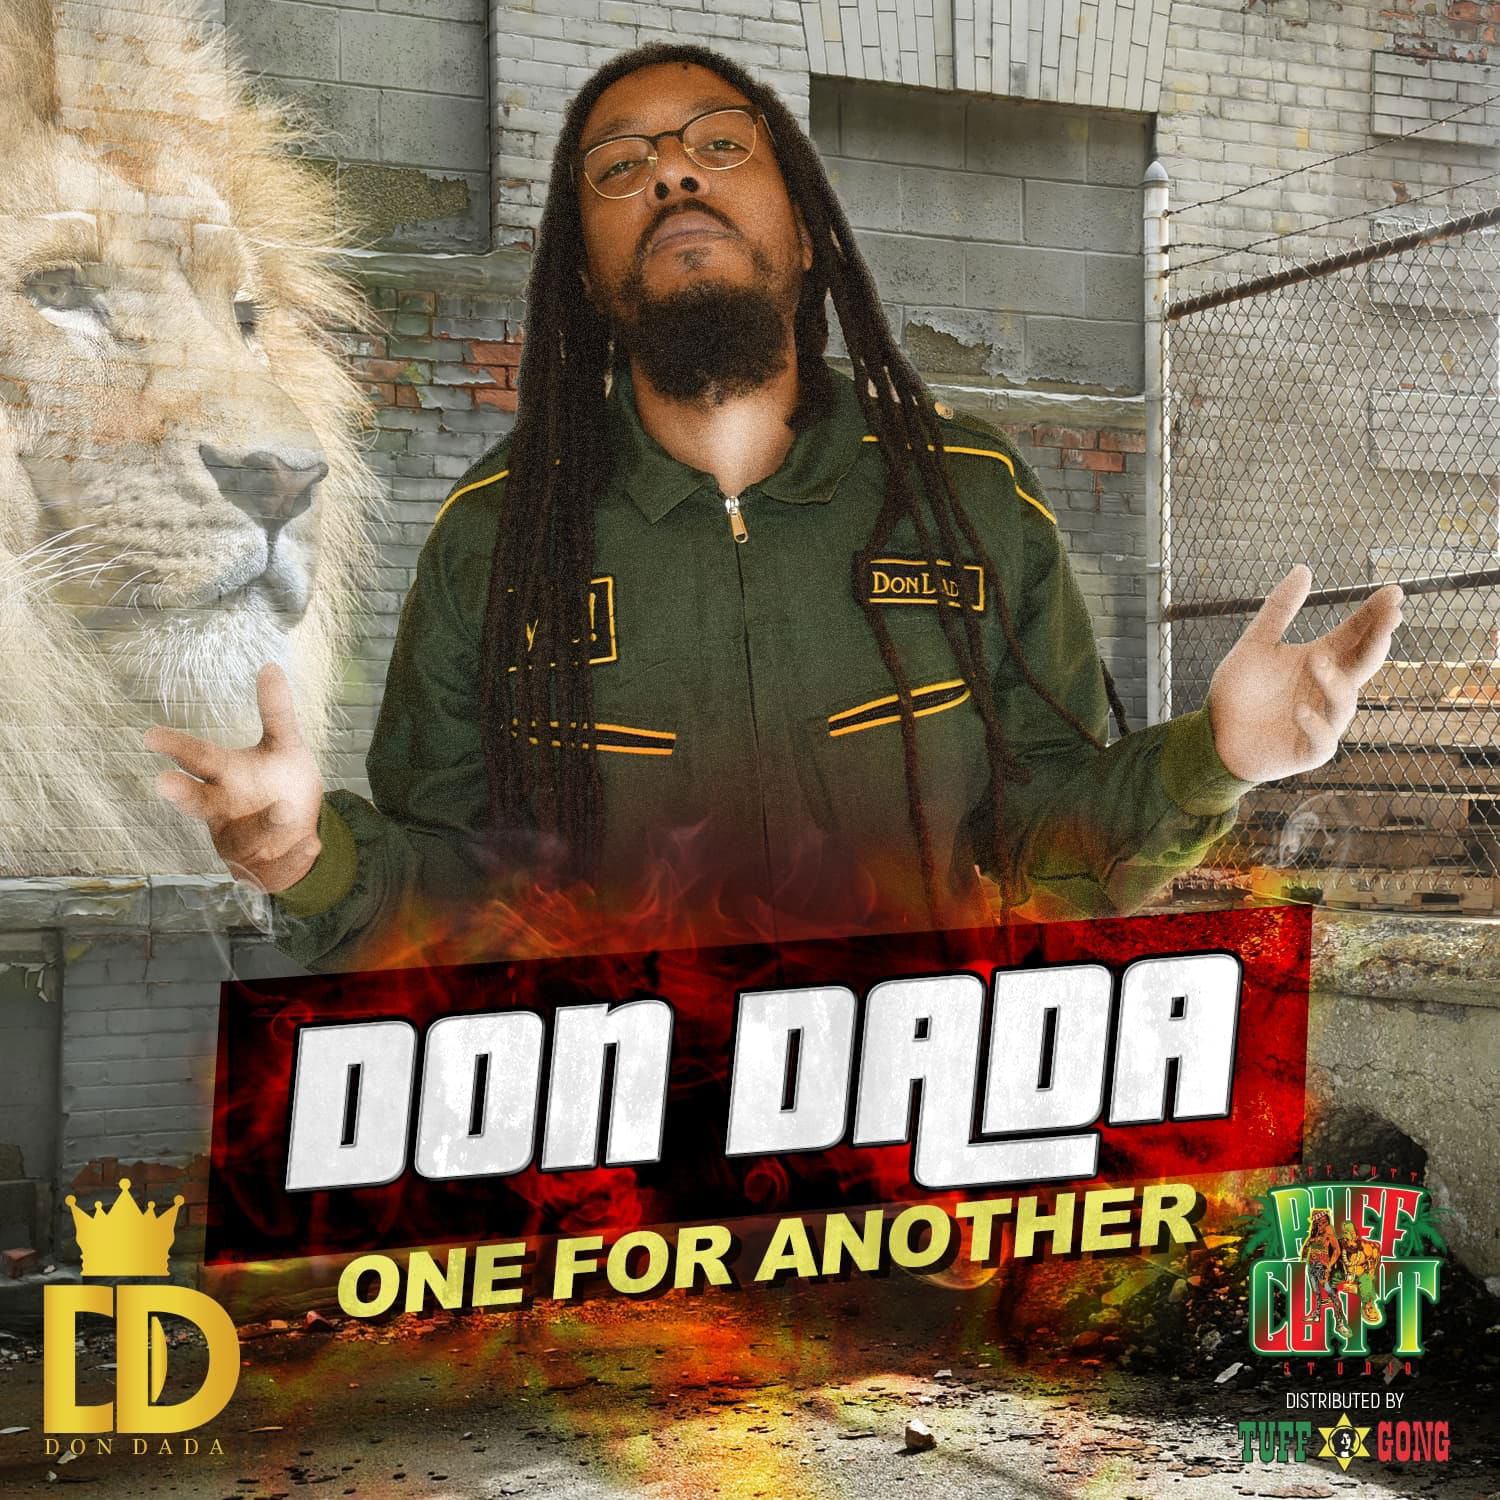 SOUTH AFRICAN REGGAE / HIP-HOP ARTISTEDON DADA RELEASES HIS NEW SINGLES "ONE FOR ANOTHER”